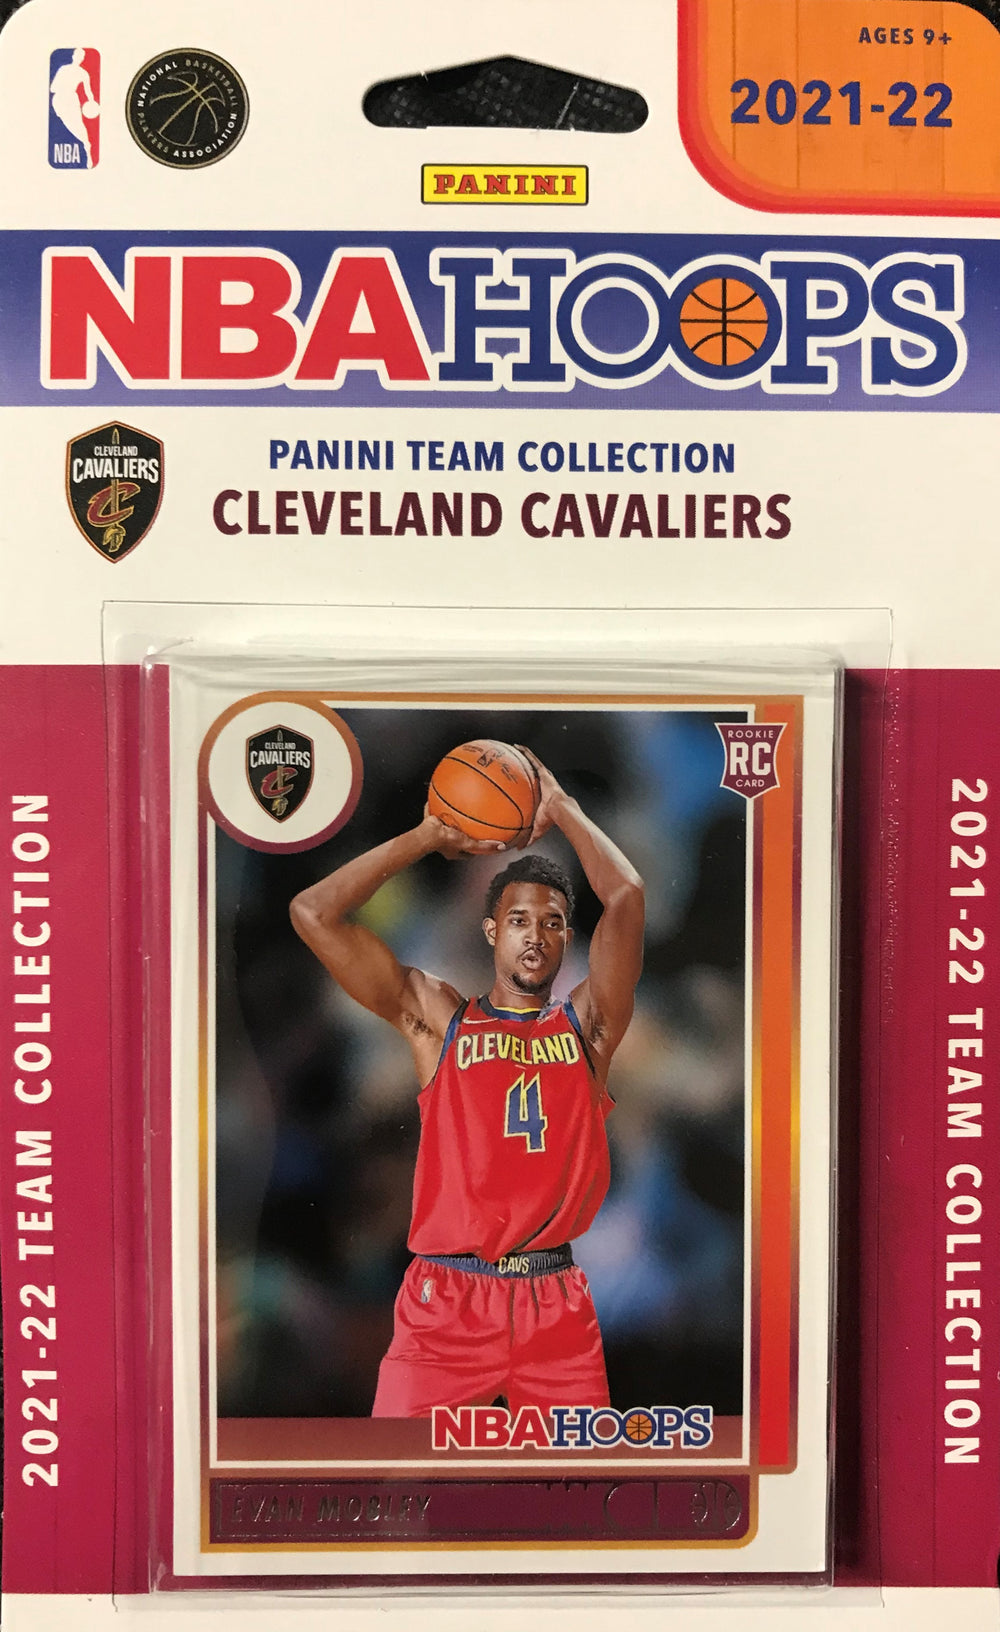 Cleveland Cavaliers 2021 2022 Hoops Factory Sealed Team Set with Evan Mobley Rookie card